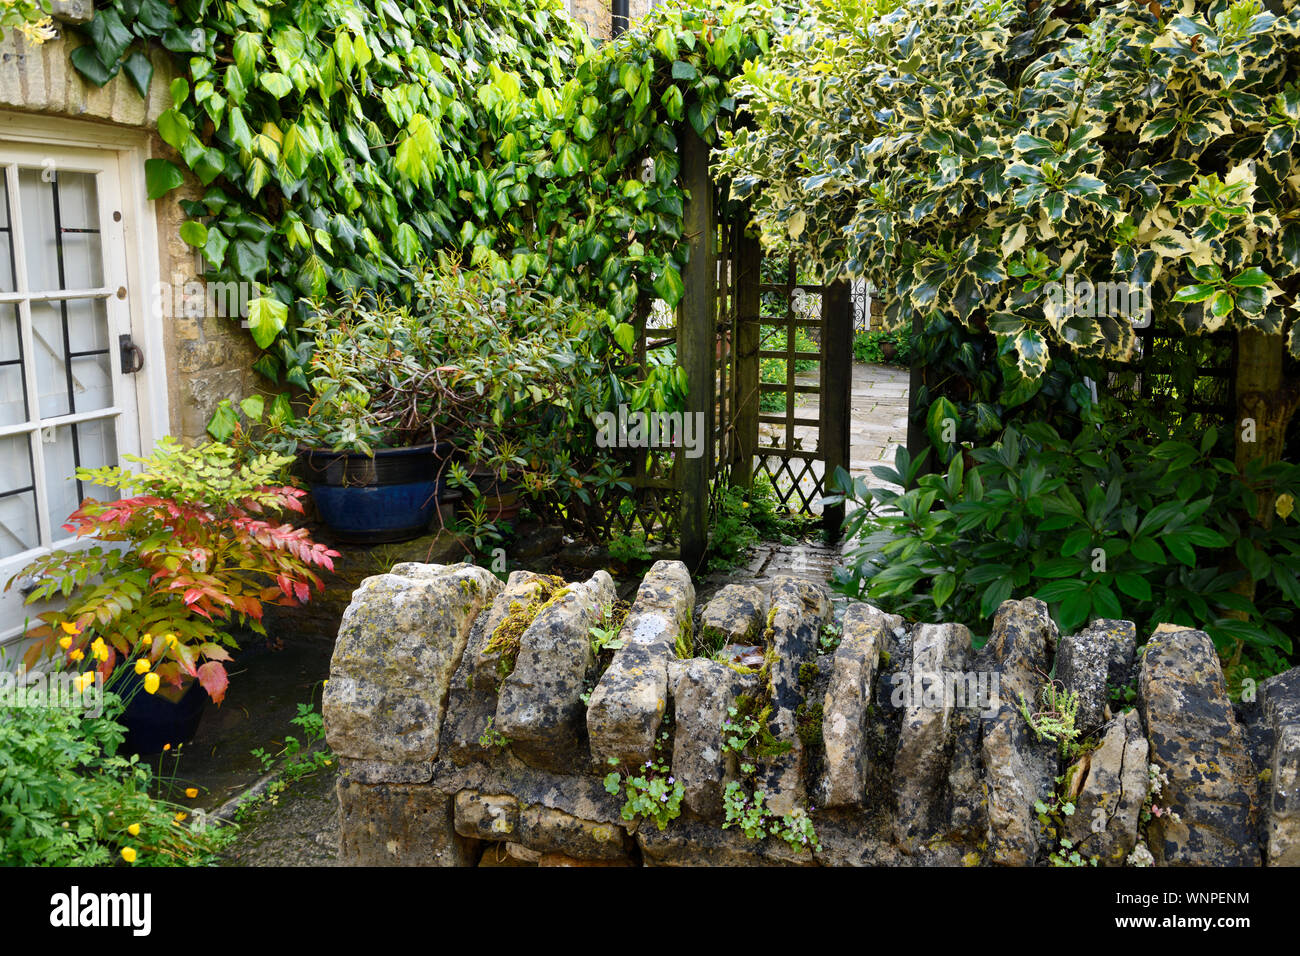 Residential garden and patio with wet plants after a rain shower in Bouton-on-the-water in the Cotswolds England Stock Photo